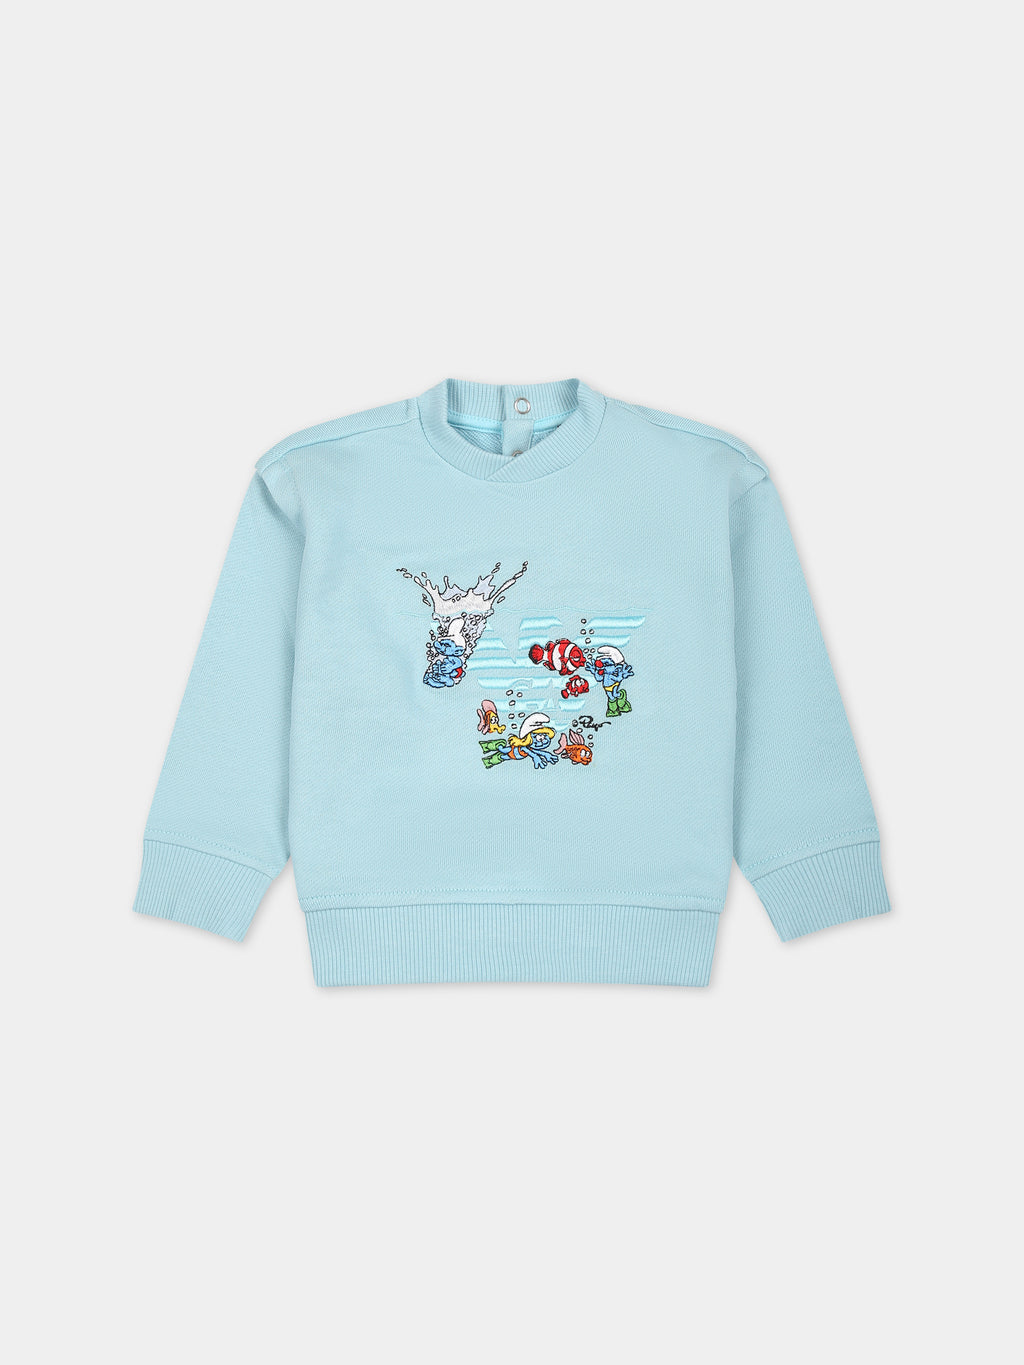 Light blue sweatshirt for baby boy with The Smurfs